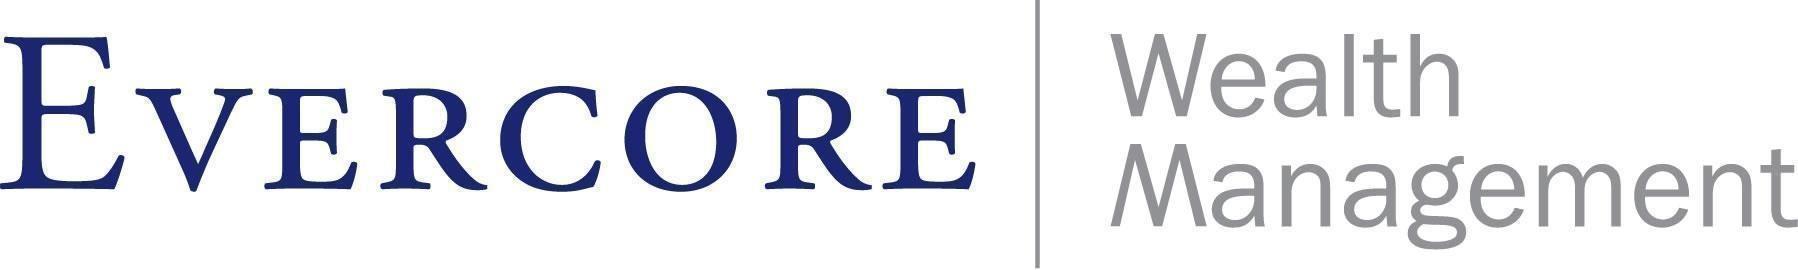 Evercore Logo - Evercore Wealth Management Competitors, Revenue and Employees